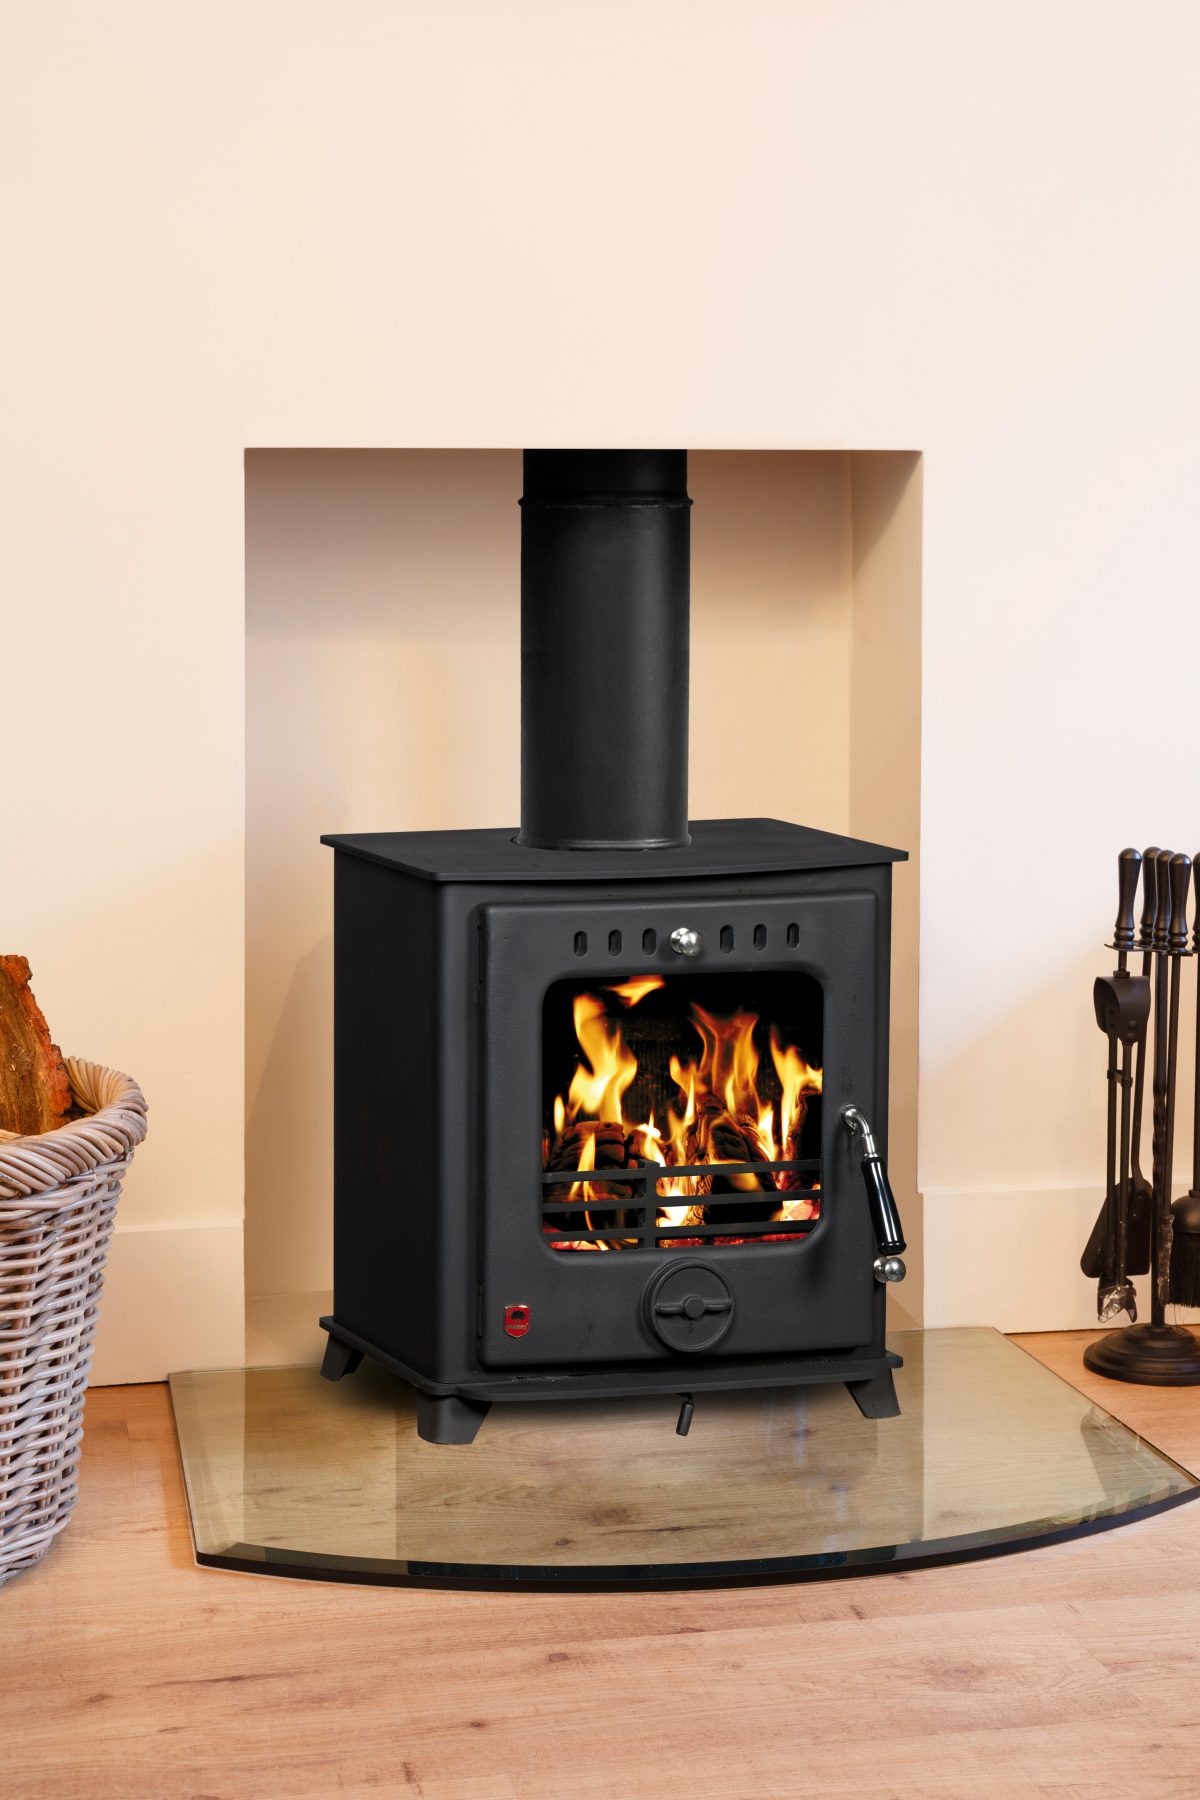 Shaw 10KW Steel Solid Fuel Stove